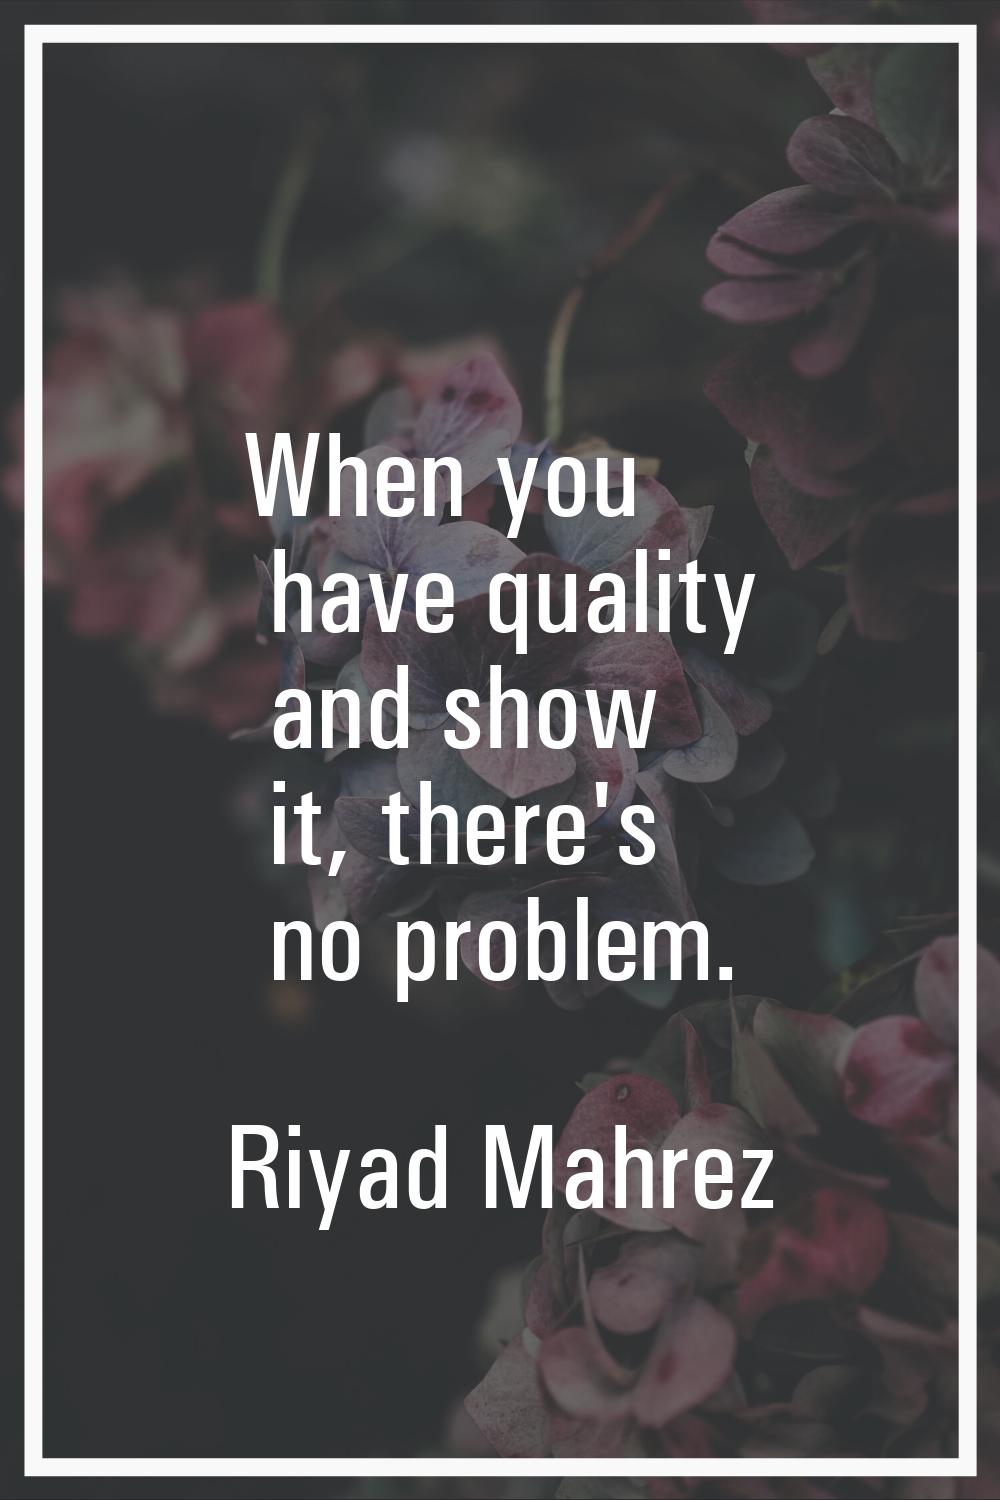 When you have quality and show it, there's no problem.